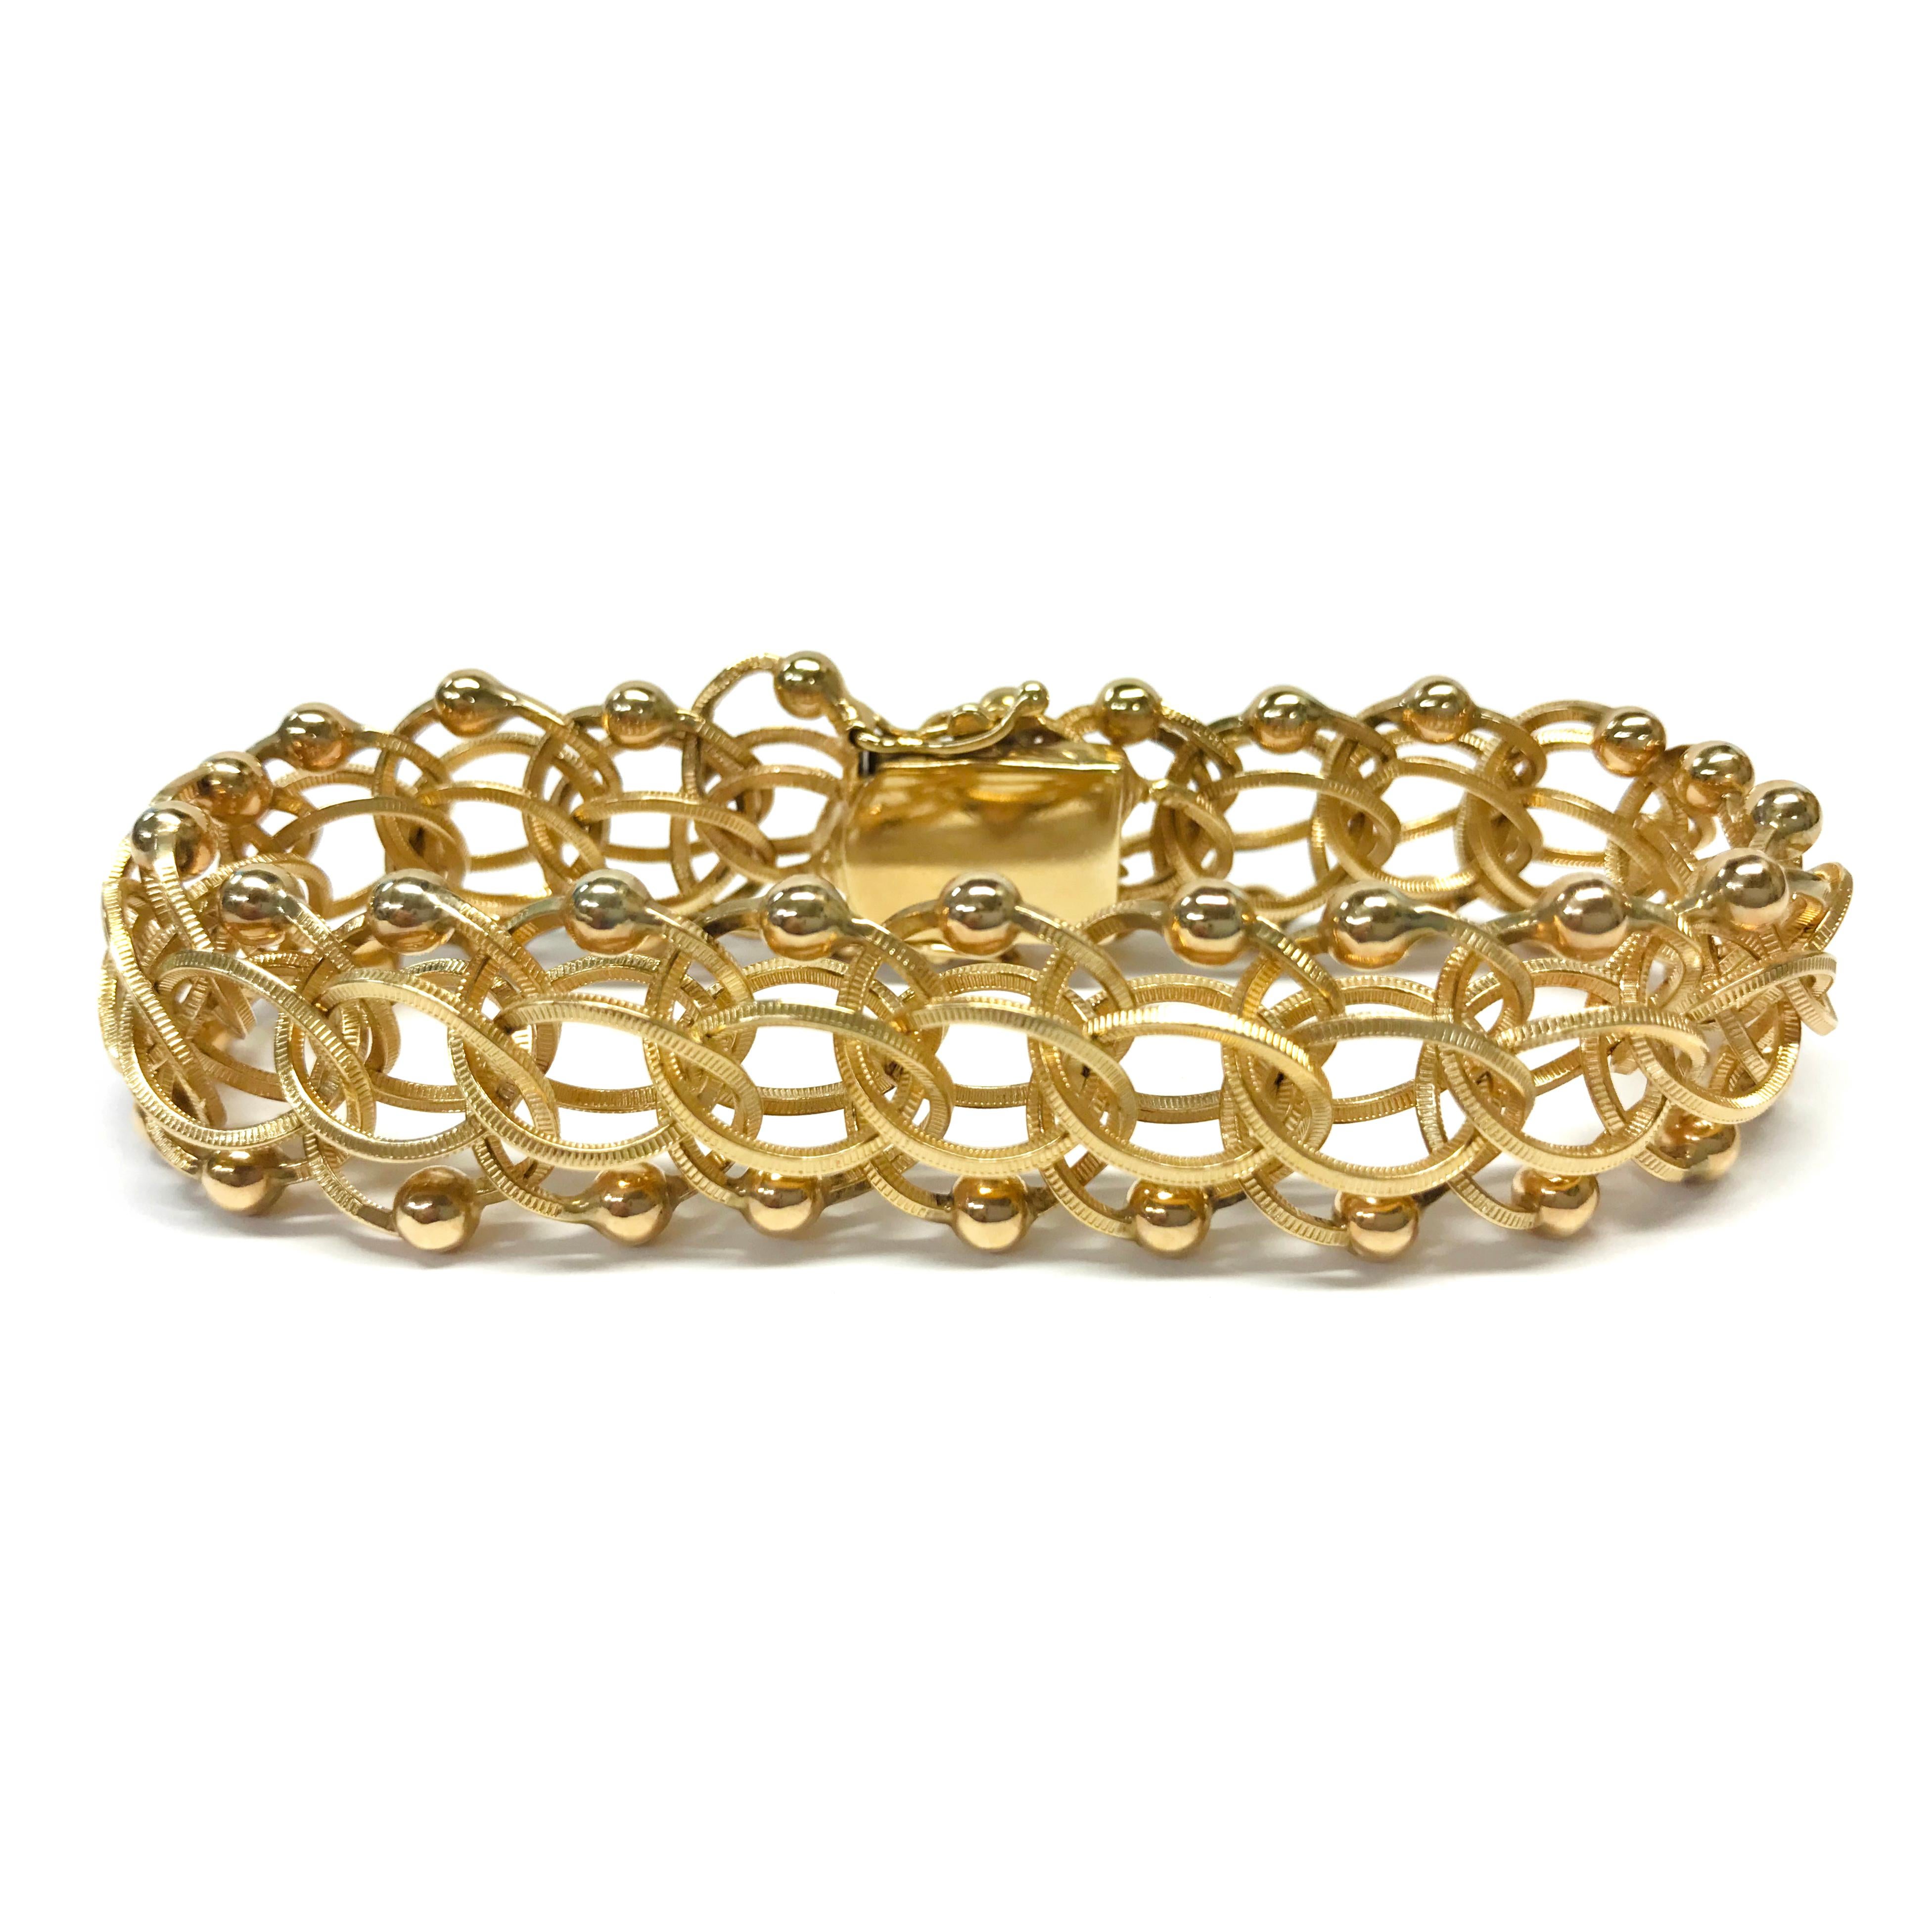 14 Karat Fancy Link Charm Bracelet. This unique bracelet features multiple textured links, one with a round gold bead, all linked together to create a fabulous layered look. The bracelet is 15.5mm wide, 8.5